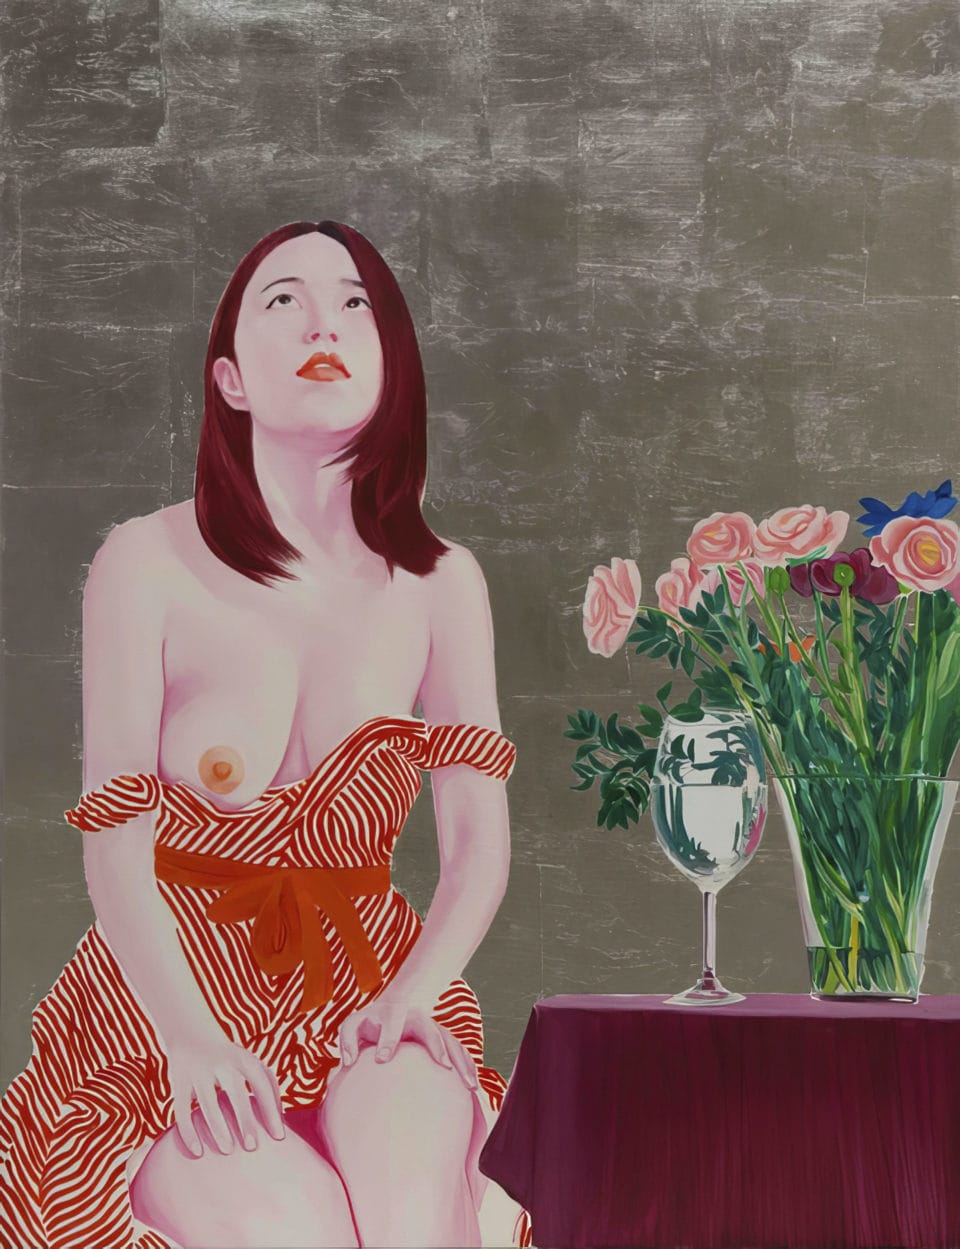 China girl with flowers Huile et feuille daluminium sur toile oil and aluminum leaf on canvas 116x89 cm